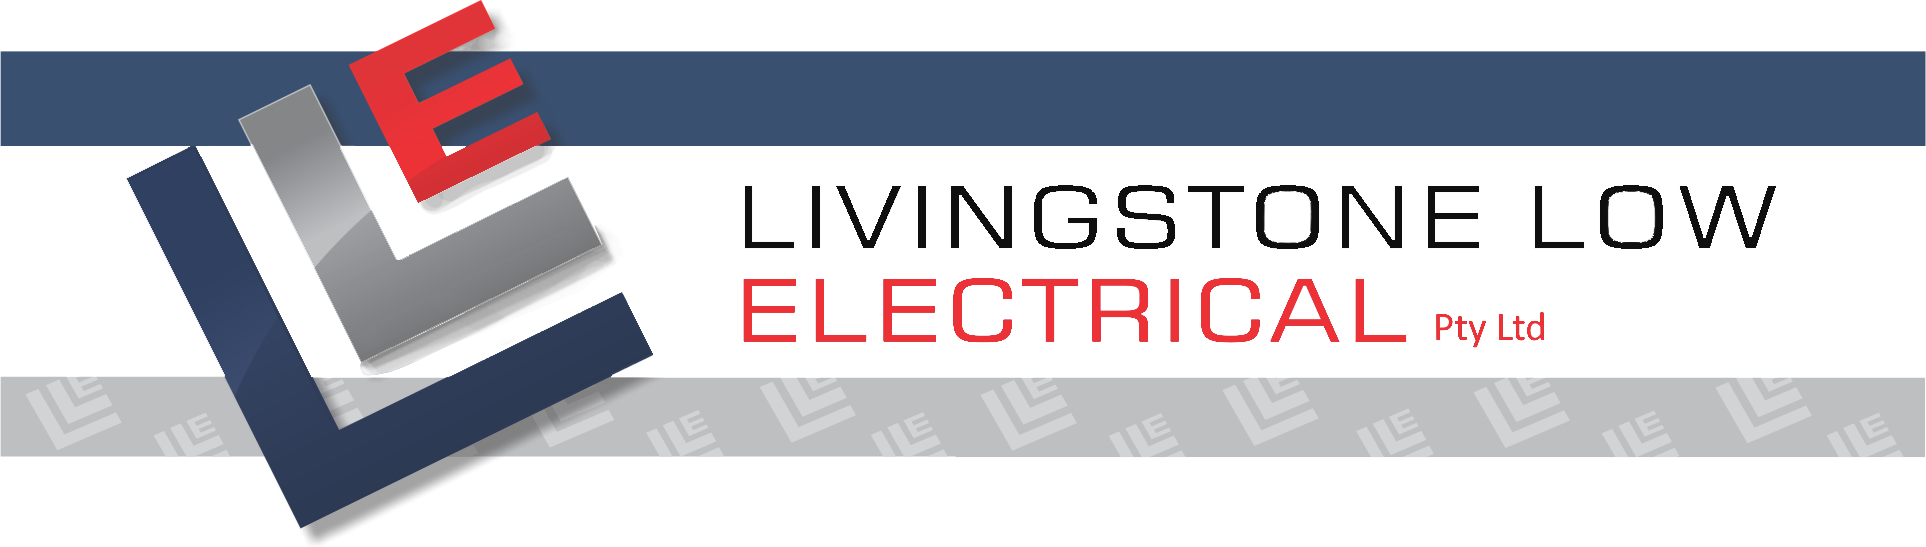 Livingstone Low Electrical